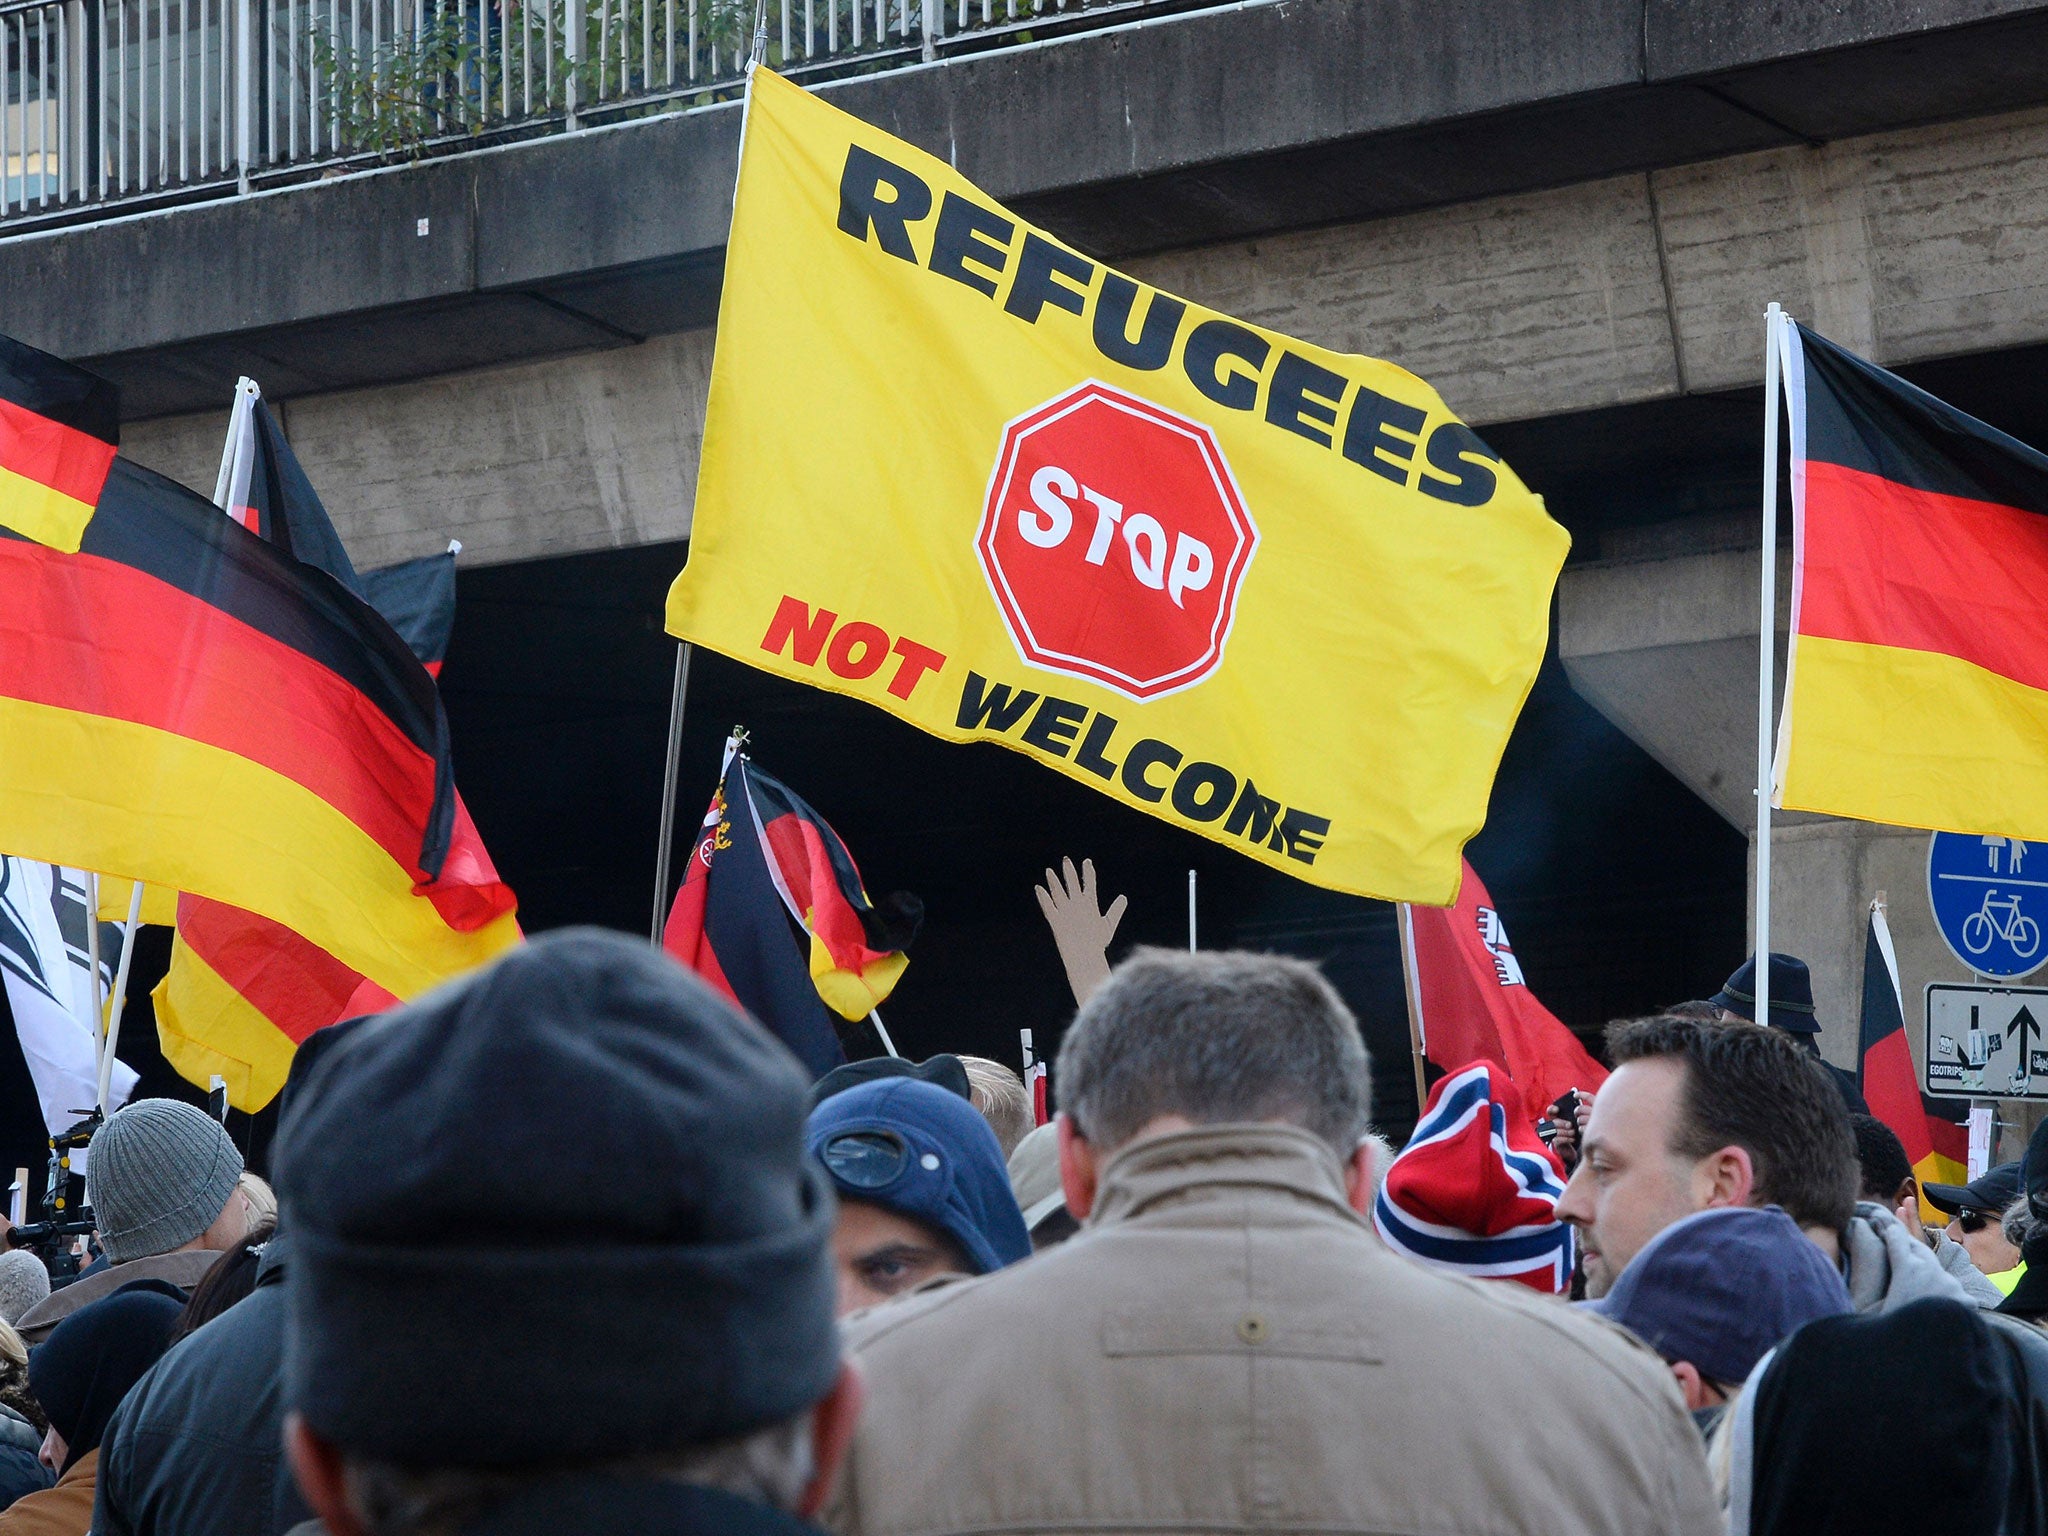 Far-right groups seized on the rumours to fuel anti-immigration protests